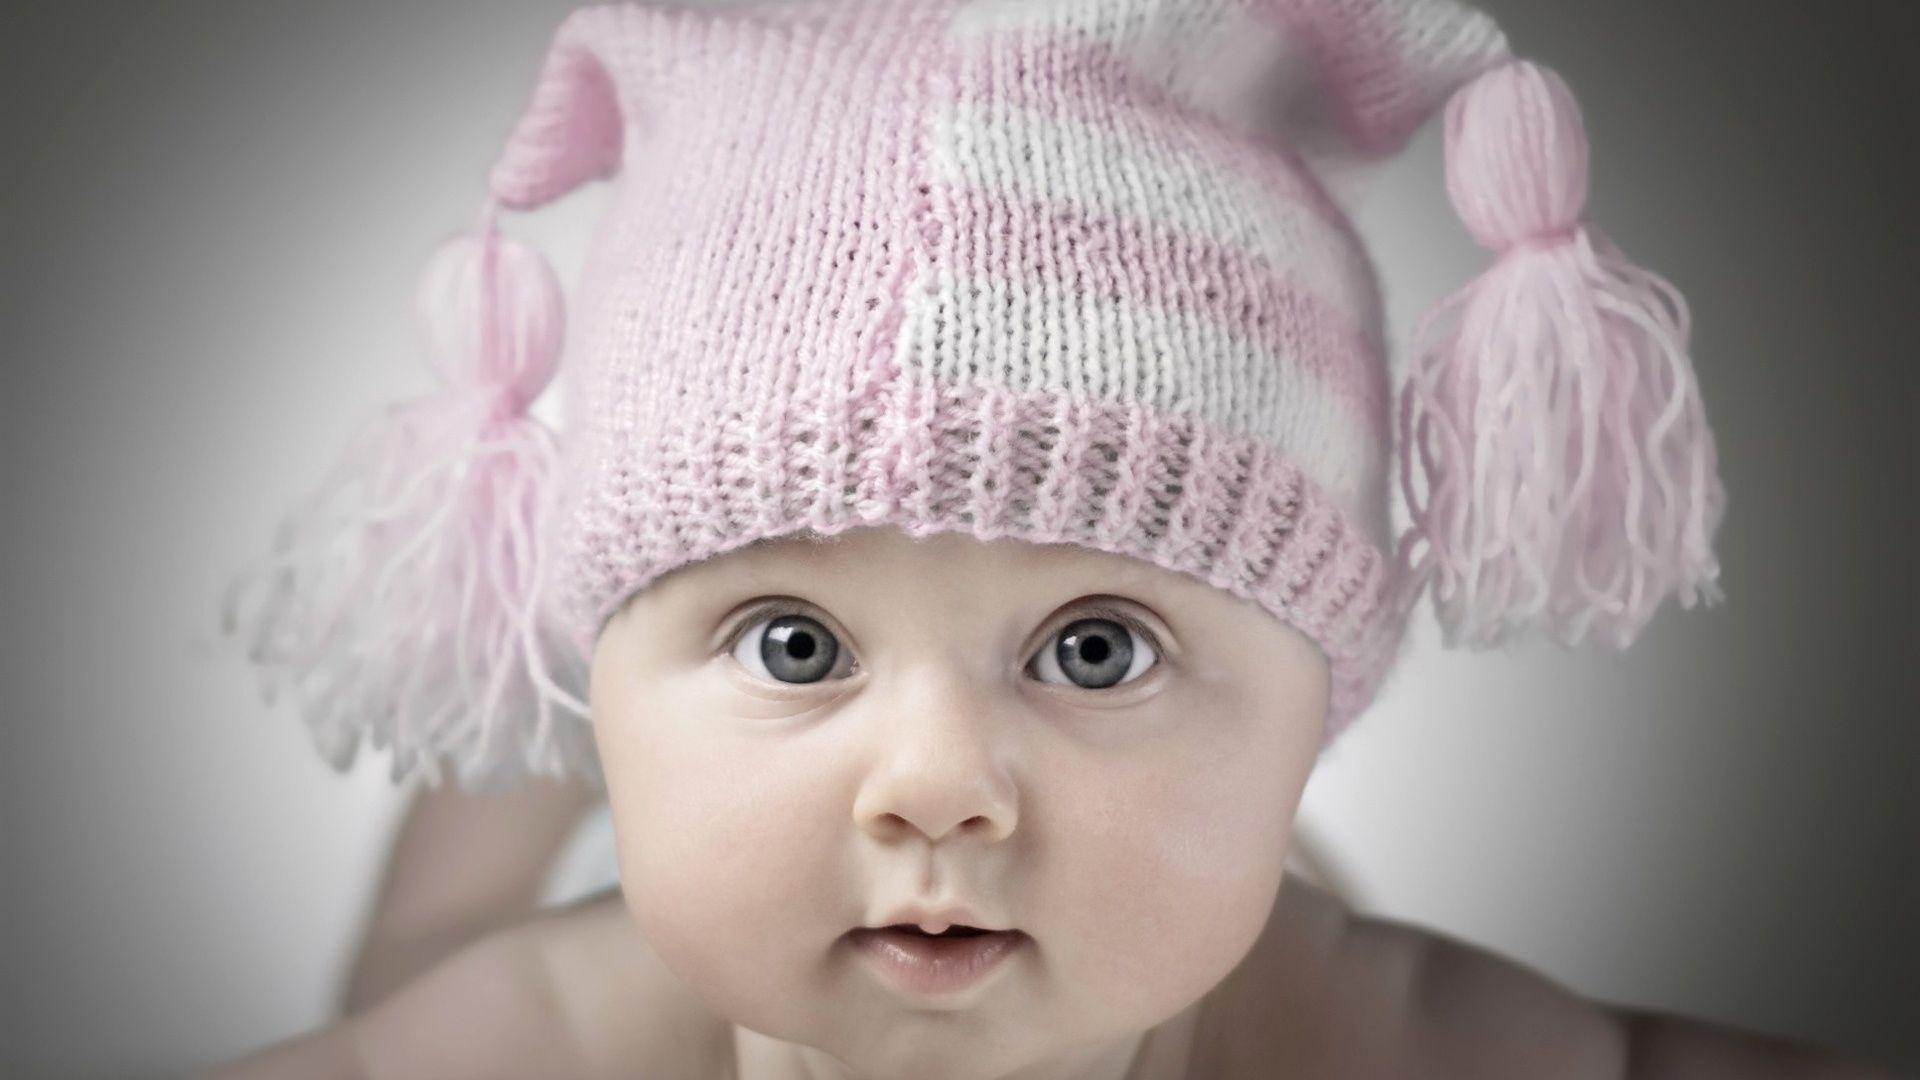 Cute Baby Wallpaper, Picture, Image